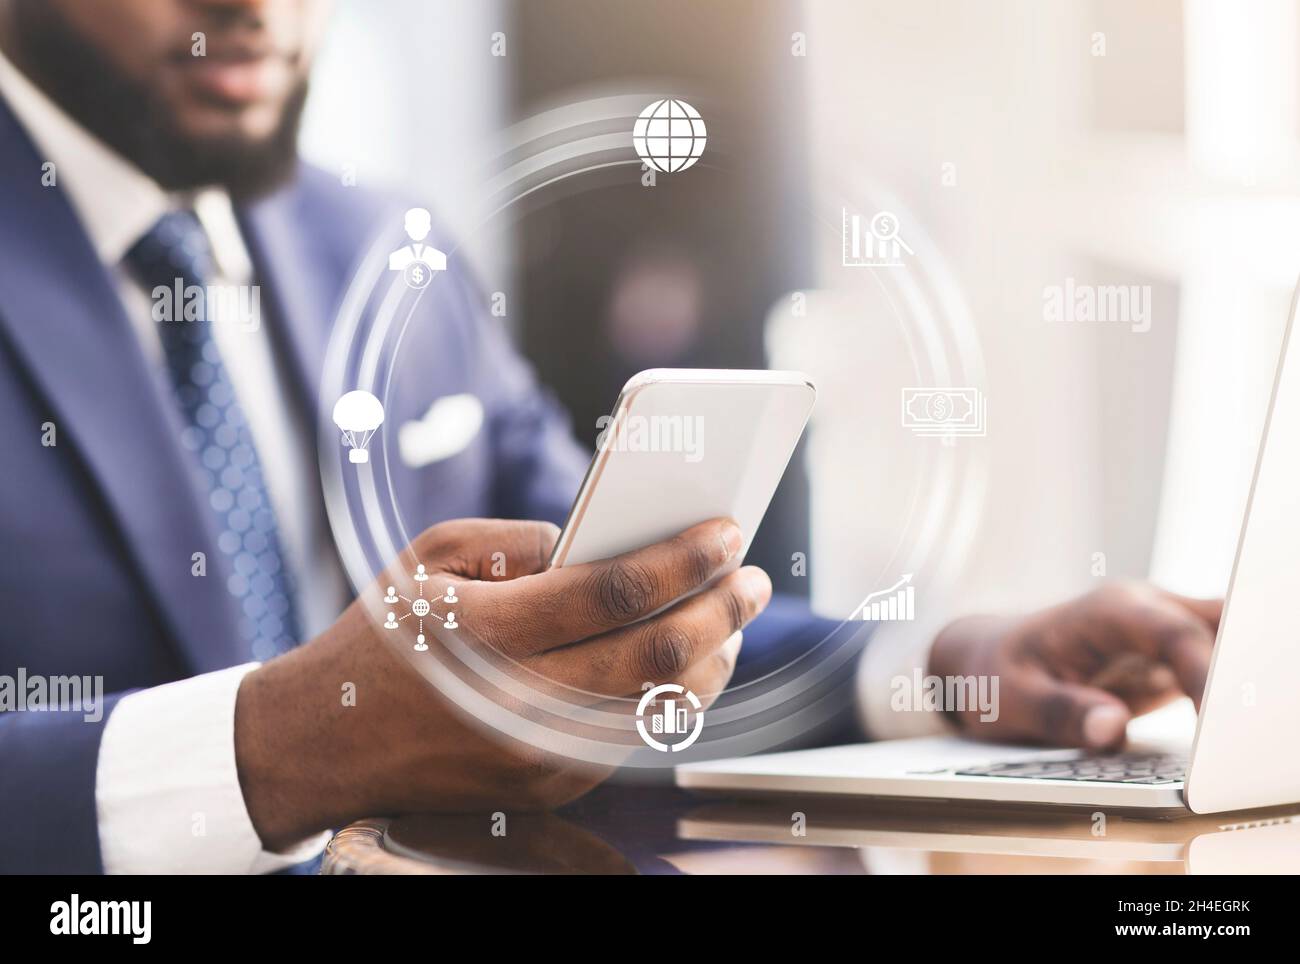 Young black man working in office with laptop and smartphone, collage with abstract icons at workplace Stock Photo